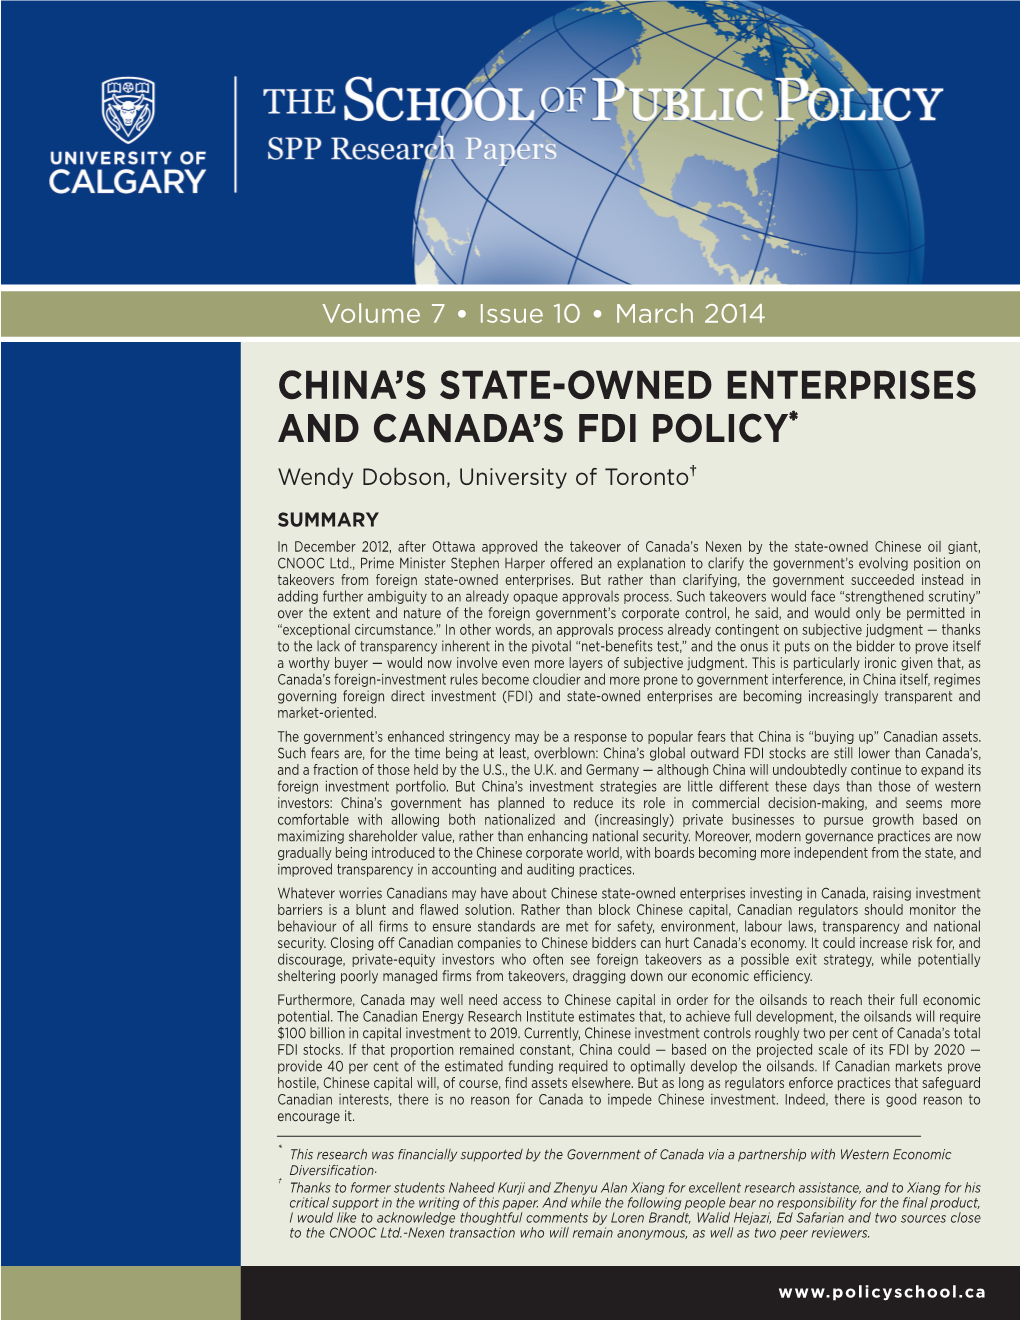 China's State-Owned Enterprises and Canada's